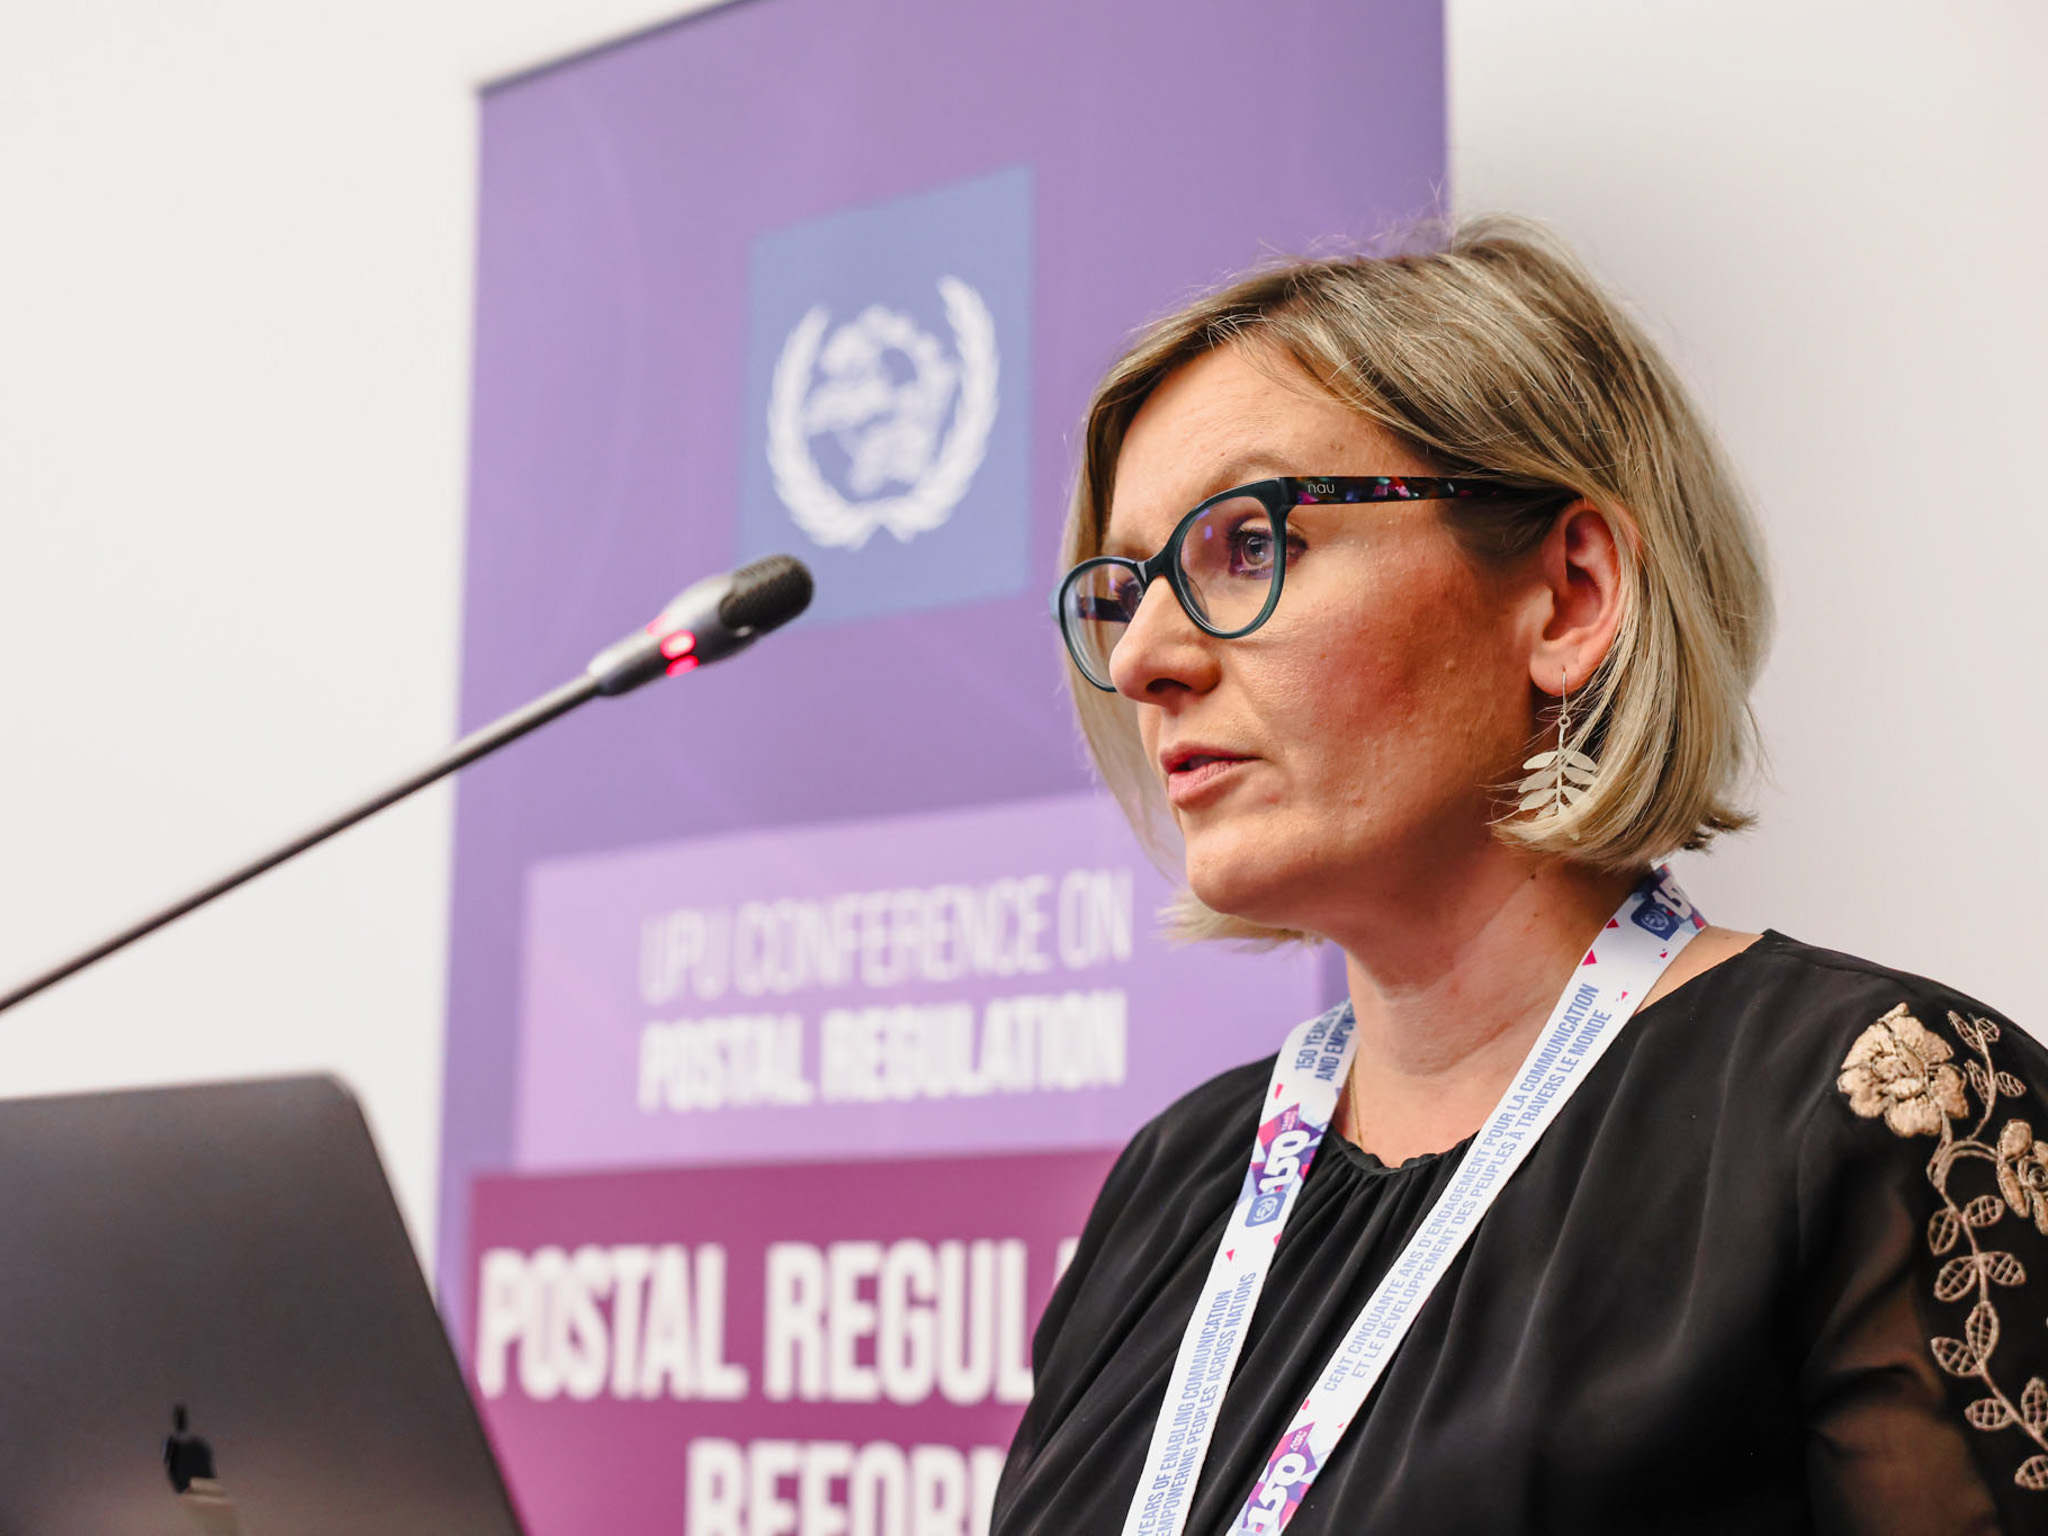 UPU conference on postal reform continues shaping postal services with global regulatory insights